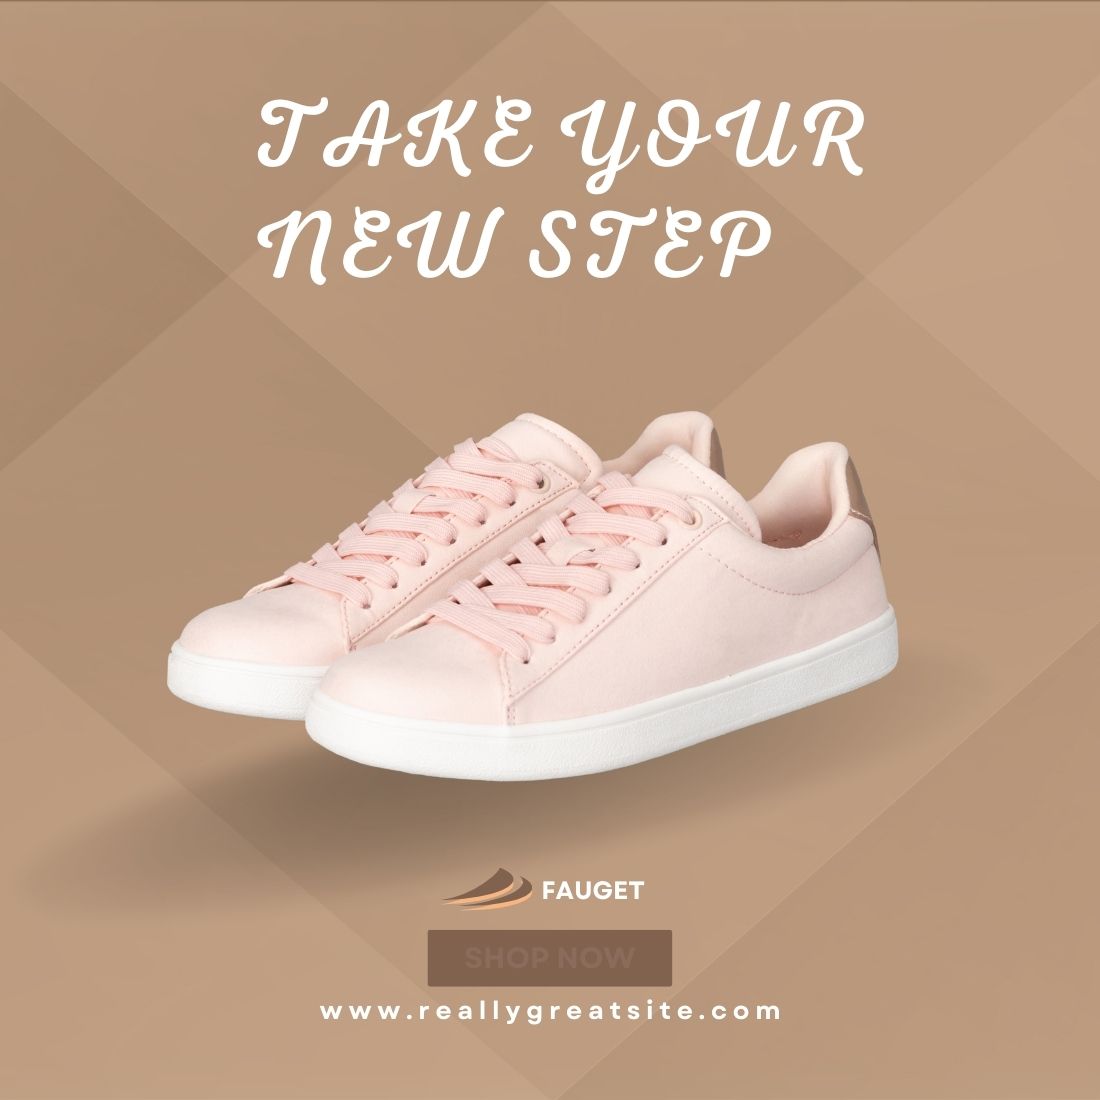 Simple ad template for shoes industry.